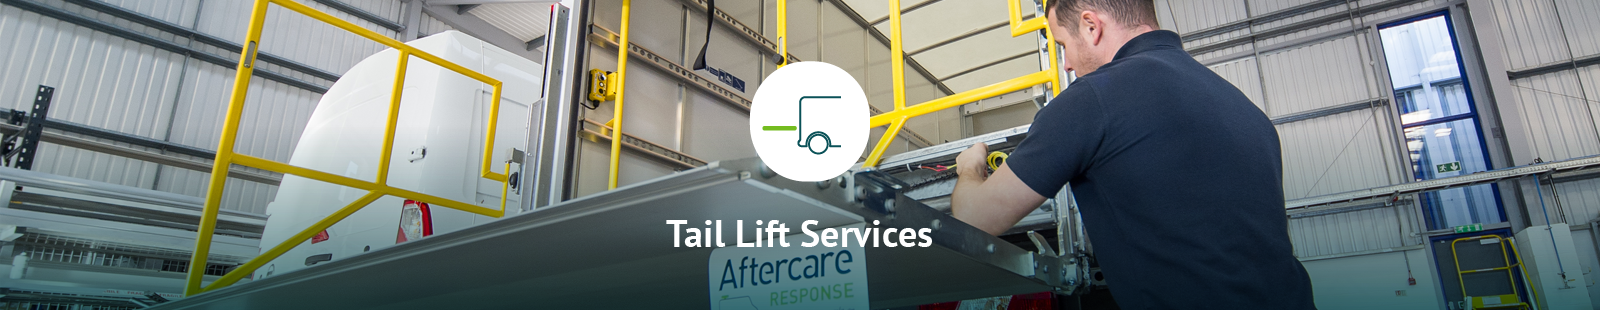 Tail Lift Services